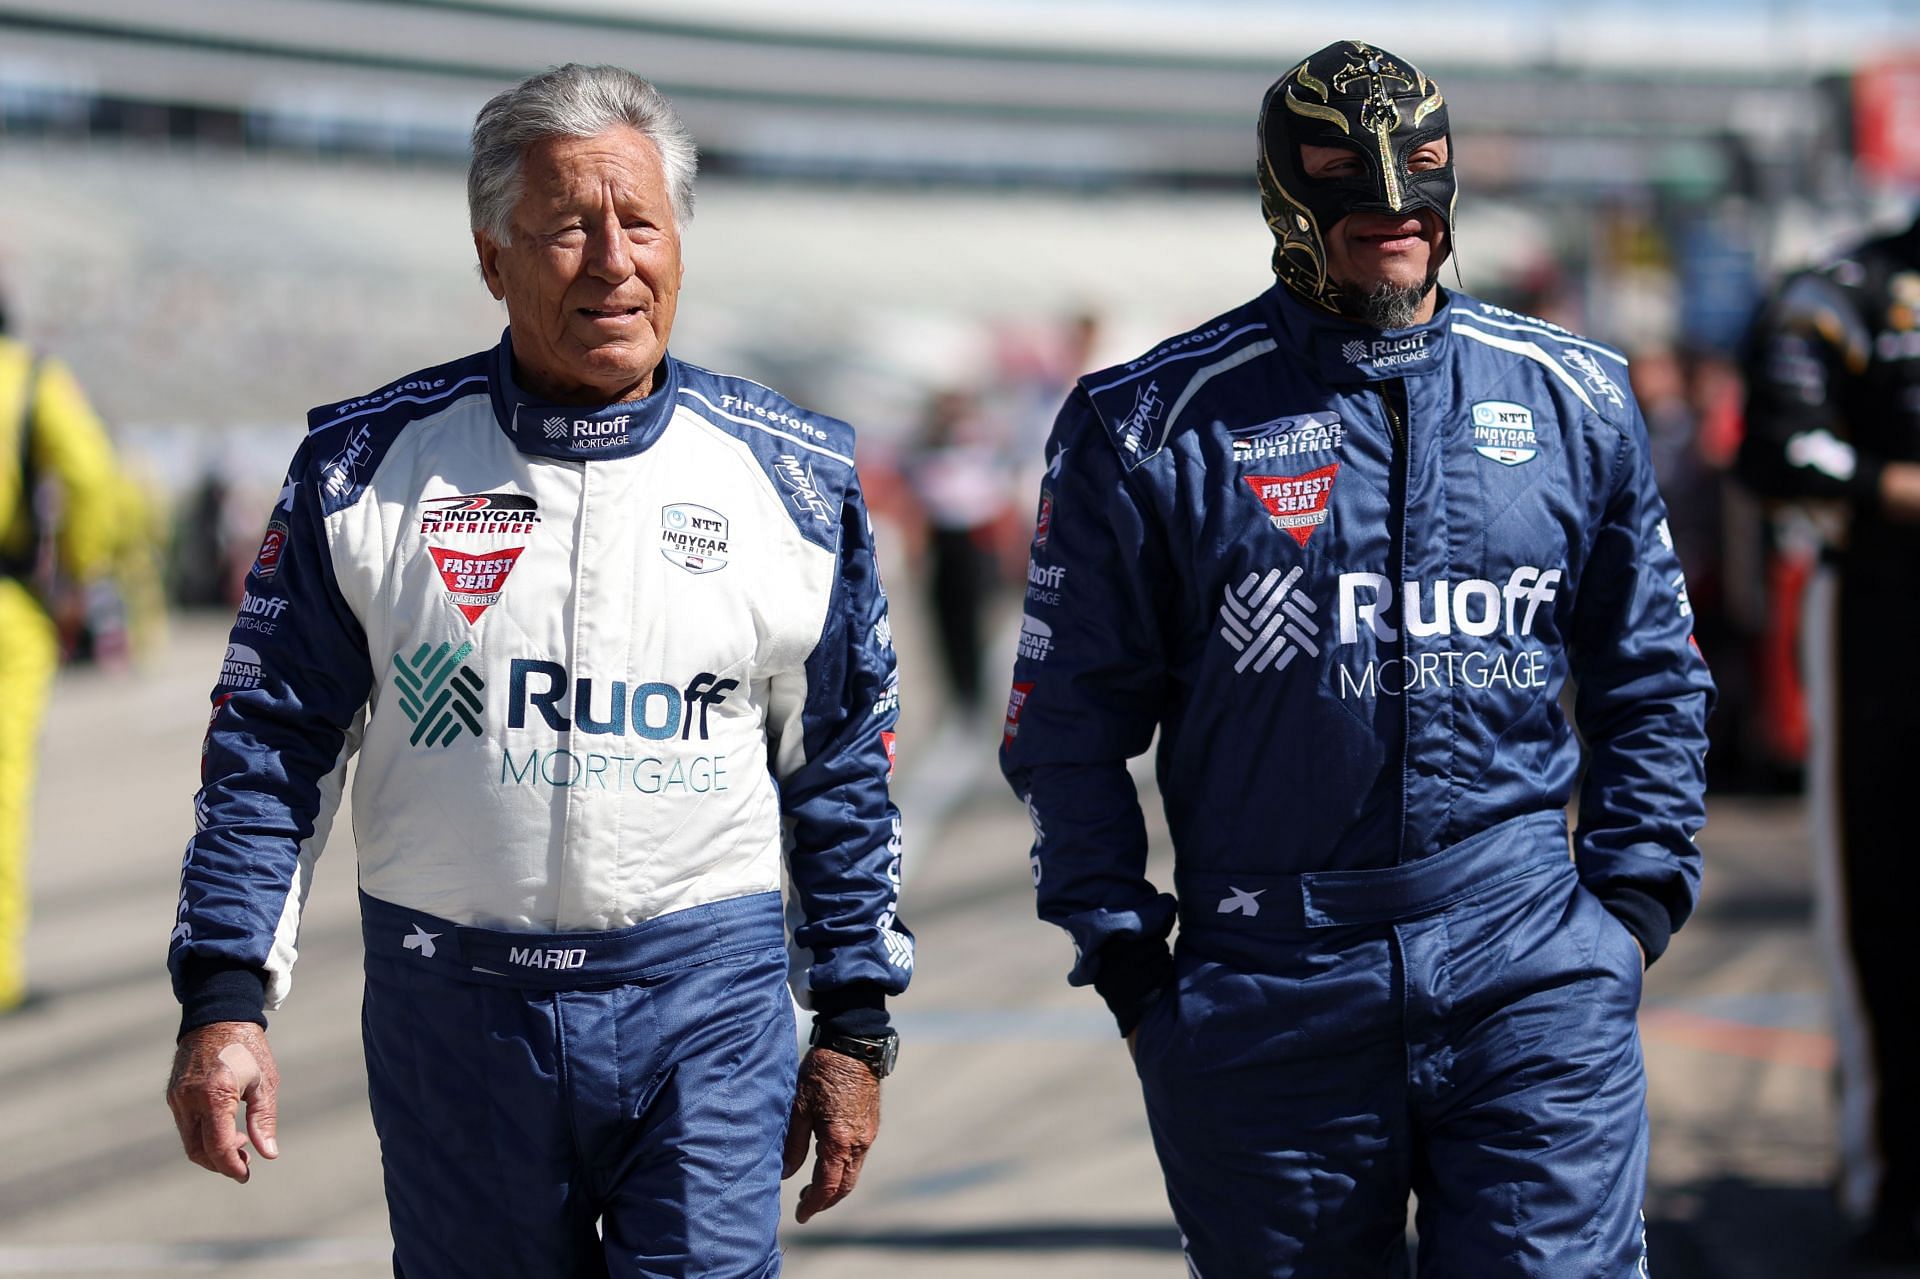 Mario Andretti&#039;s entry into F1 has faced vocal opposition from the Mercedes boss